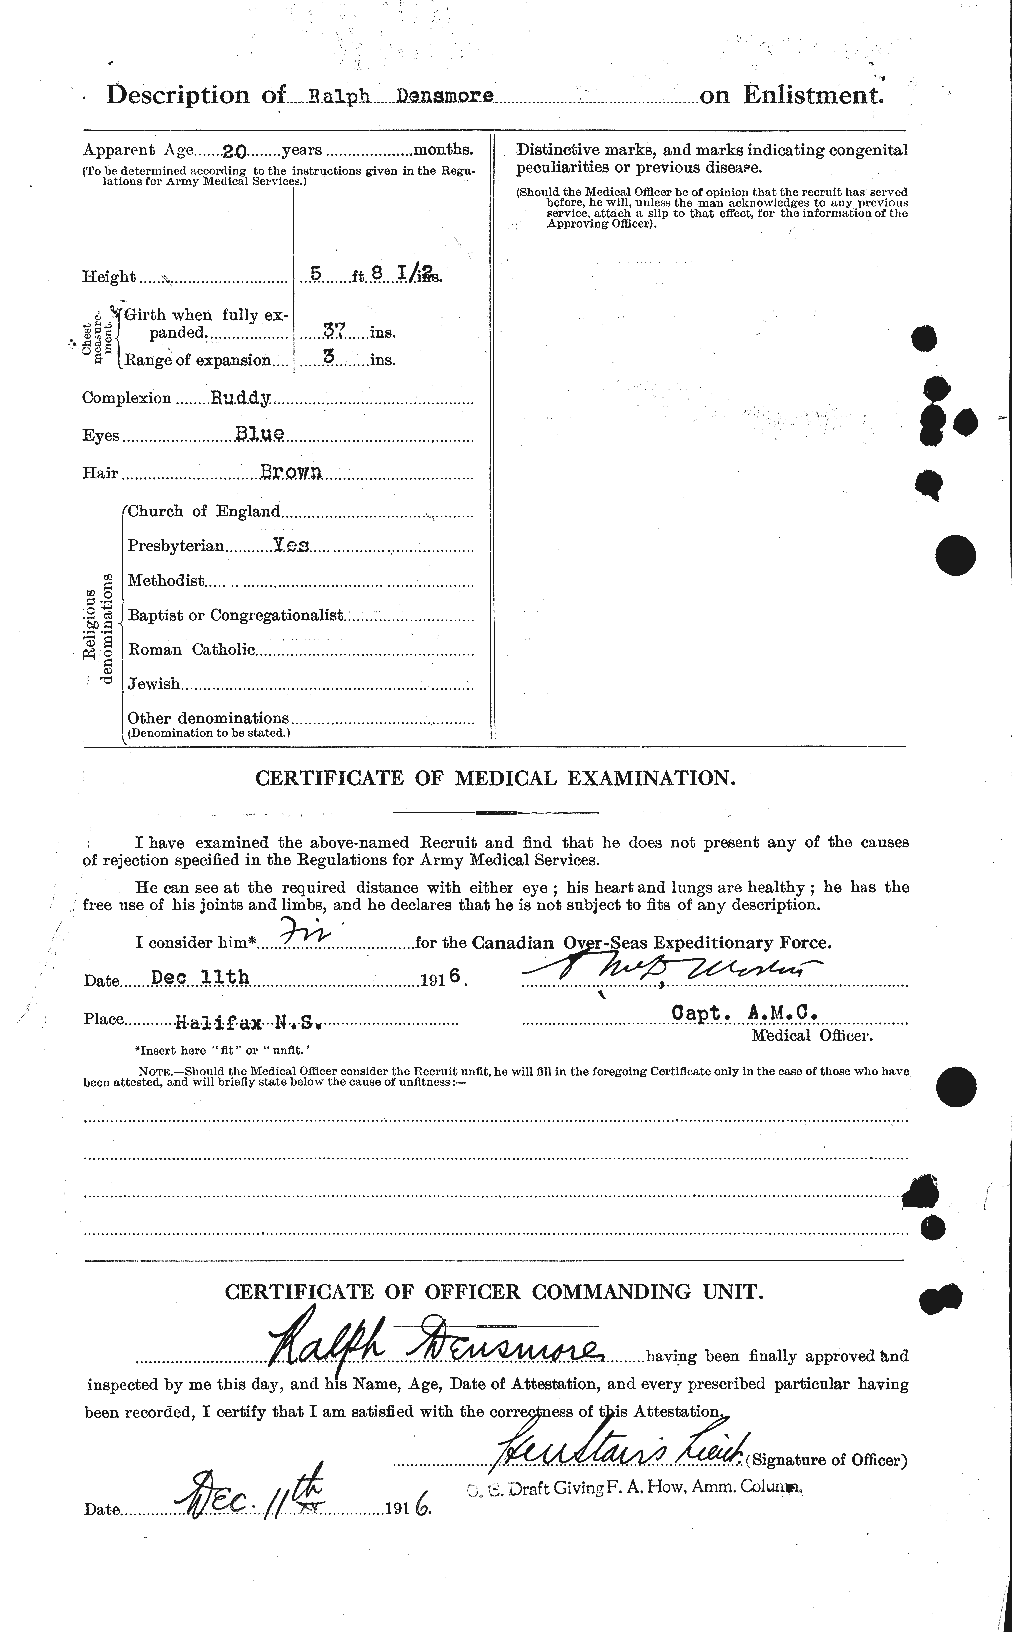 Personnel Records of the First World War - CEF 286438b